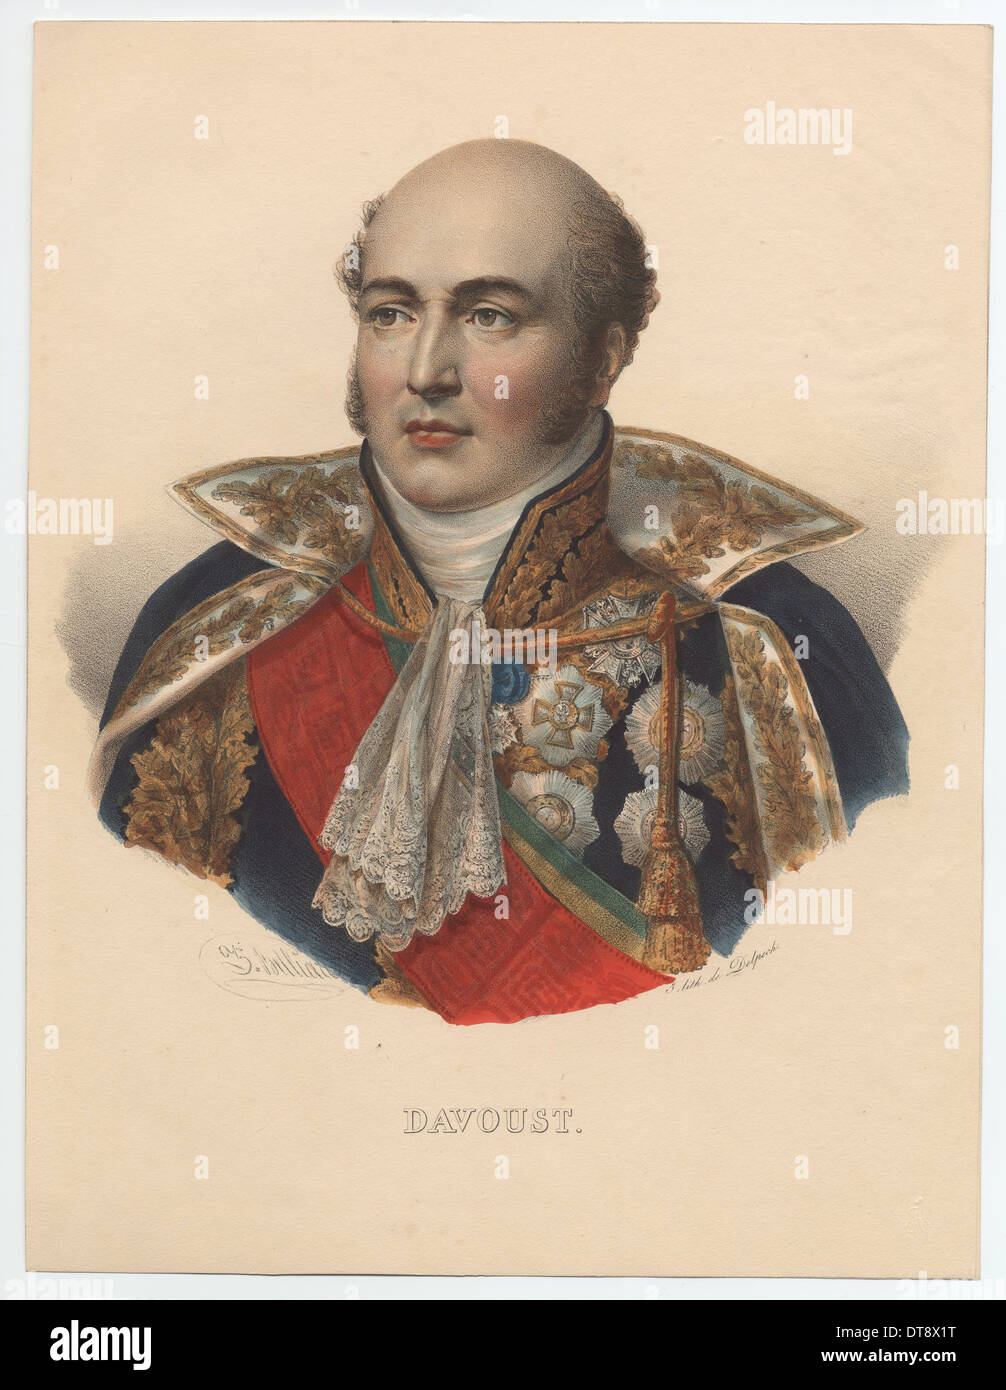 Image of François Delpech (1778-1825). Louis-Nicolas Davout (1770-1823),  Marshal Of France, Duke Of Auerstedt And Prince Of Eckmühl. Lithography,  French National Library. Full Credit: Neurdein / Roger-Viollet / Granger --  All Rights